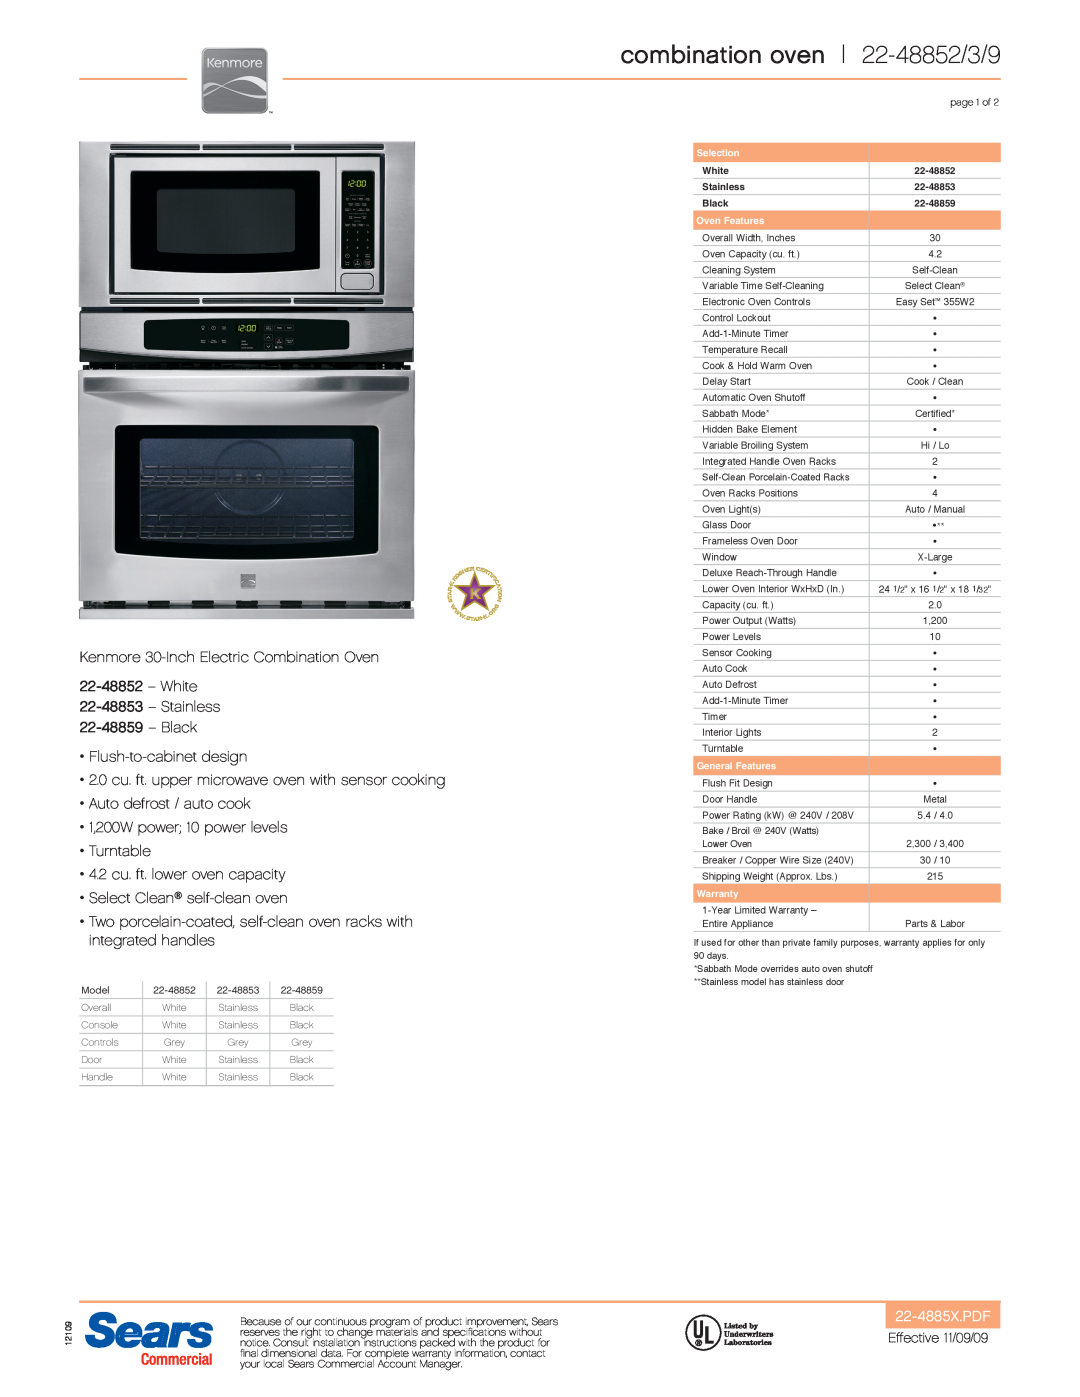 Kenmore 22-48833 combination oven 22-48852/3/9, Kenmore 30-Inch Electric Combination Oven 22-48852 - White, 22-4885X.PDF 